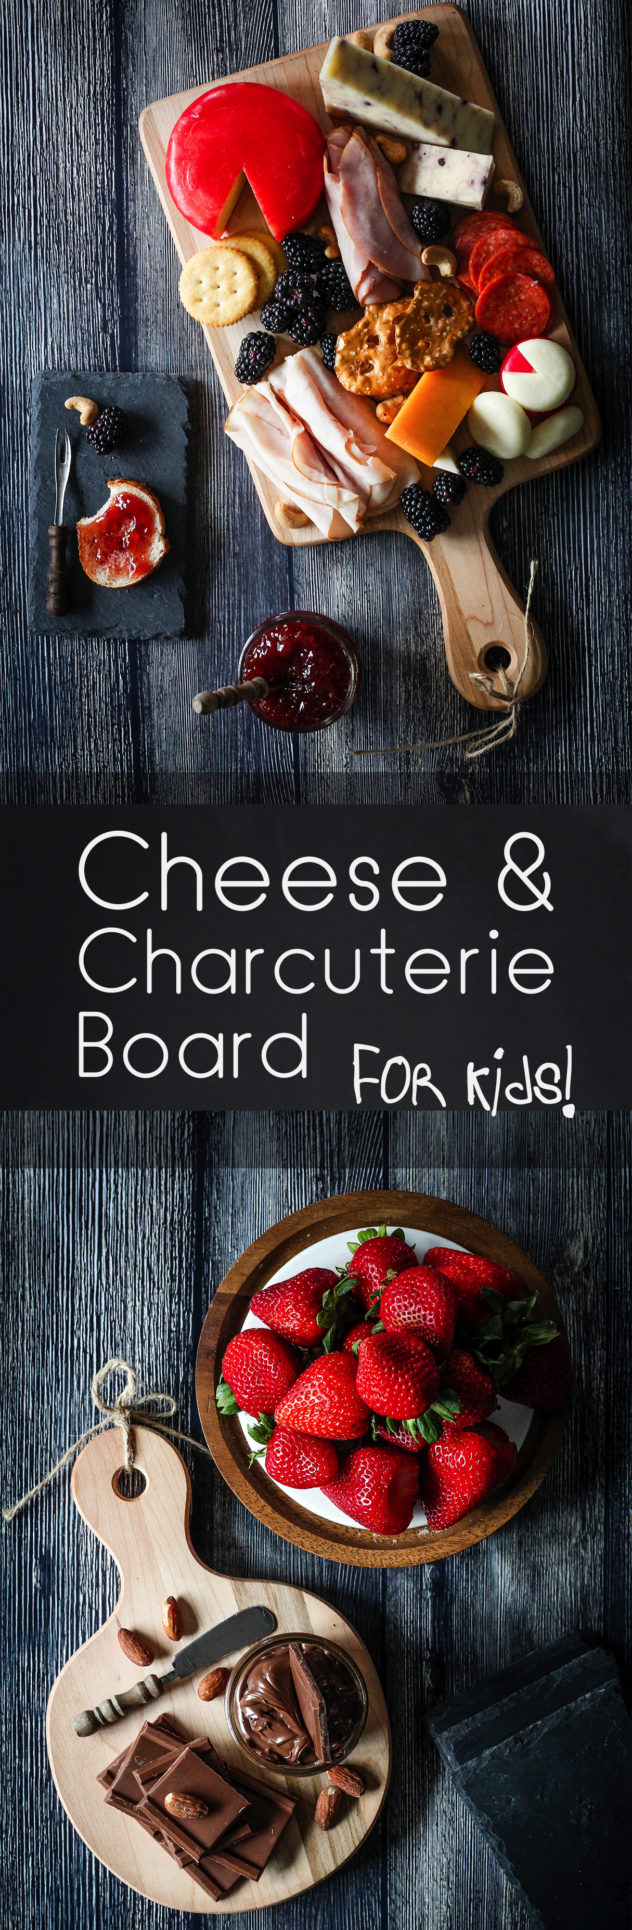 Cheese and charcuterie board for kids. Cheese and charcuterie boards are a host's best-kept party secret! Why? They require little preparation time, offer a large variety of textures and flavors, and are visual eye candy. And though they are often made with adults in mind, they're perfect for kids too! After all, kids love cheese, deli meats, crackers, fruit, and dips--all the components of a delicious and memorable cheese and charcuterie board for kids! sweet, salty, savory food of parties and events. party, hosting, event planning food spread